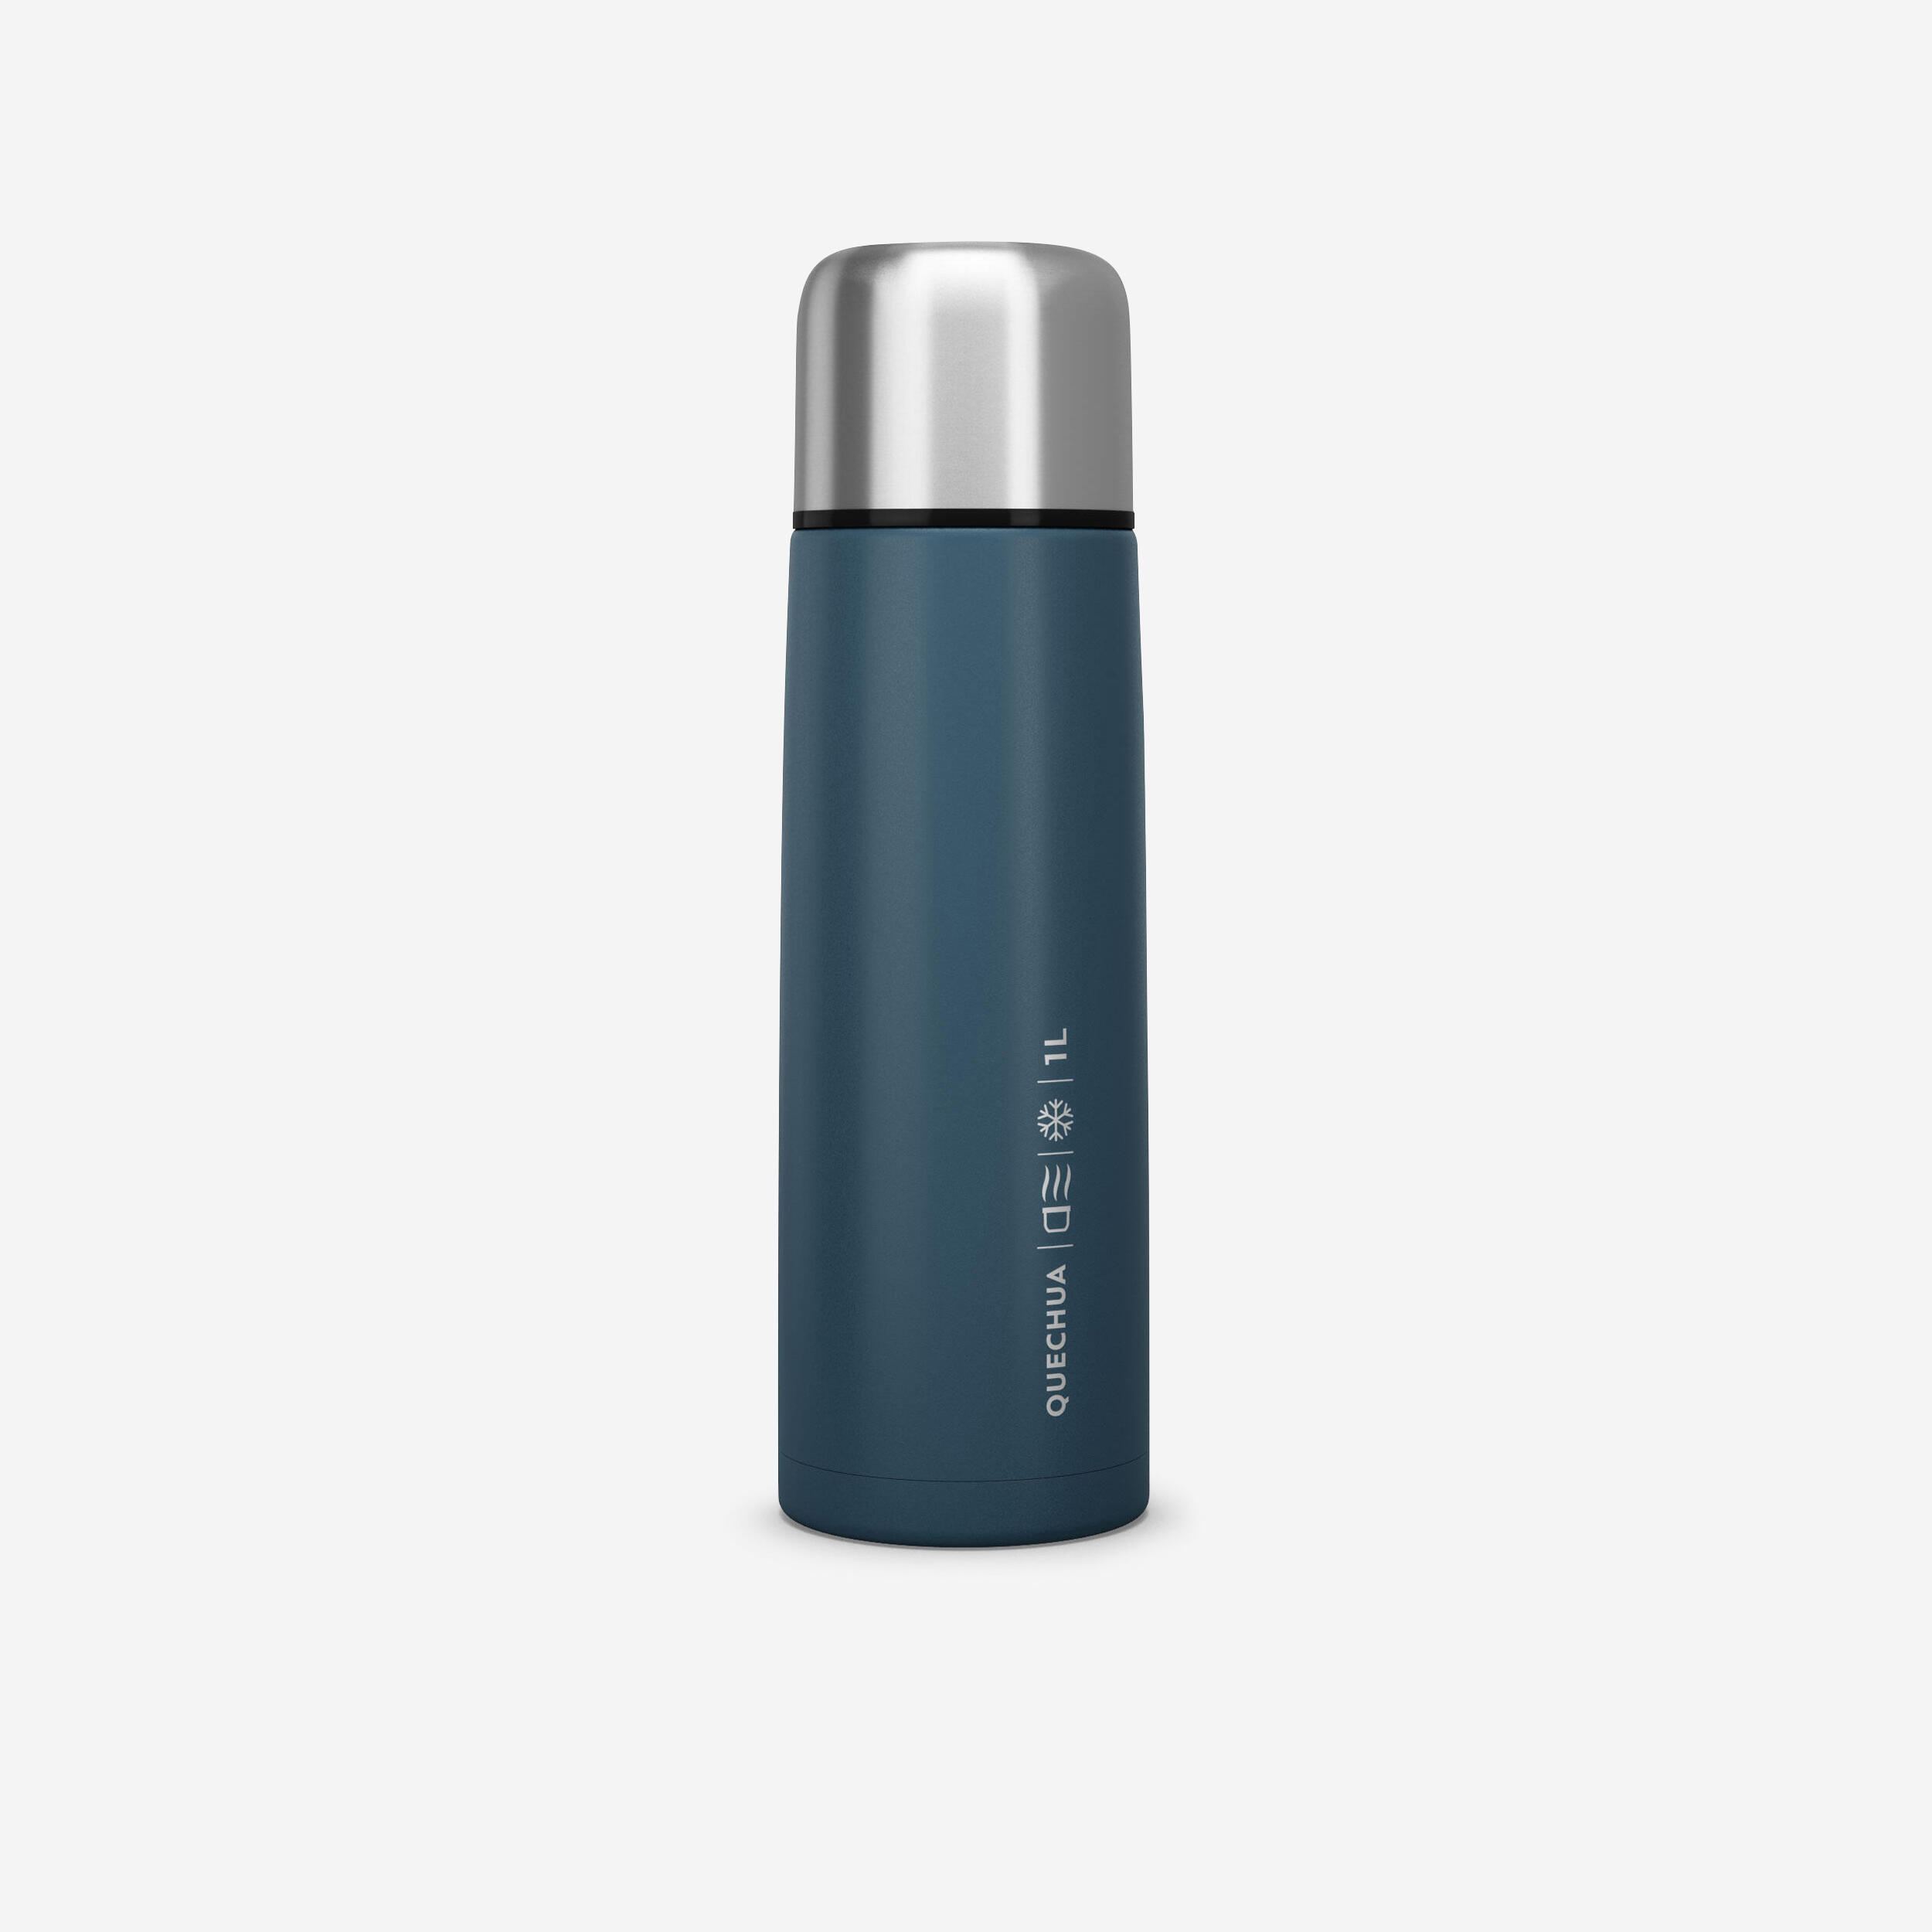 Hiking stainless steel insulated bottle 1 L - QUECHUA